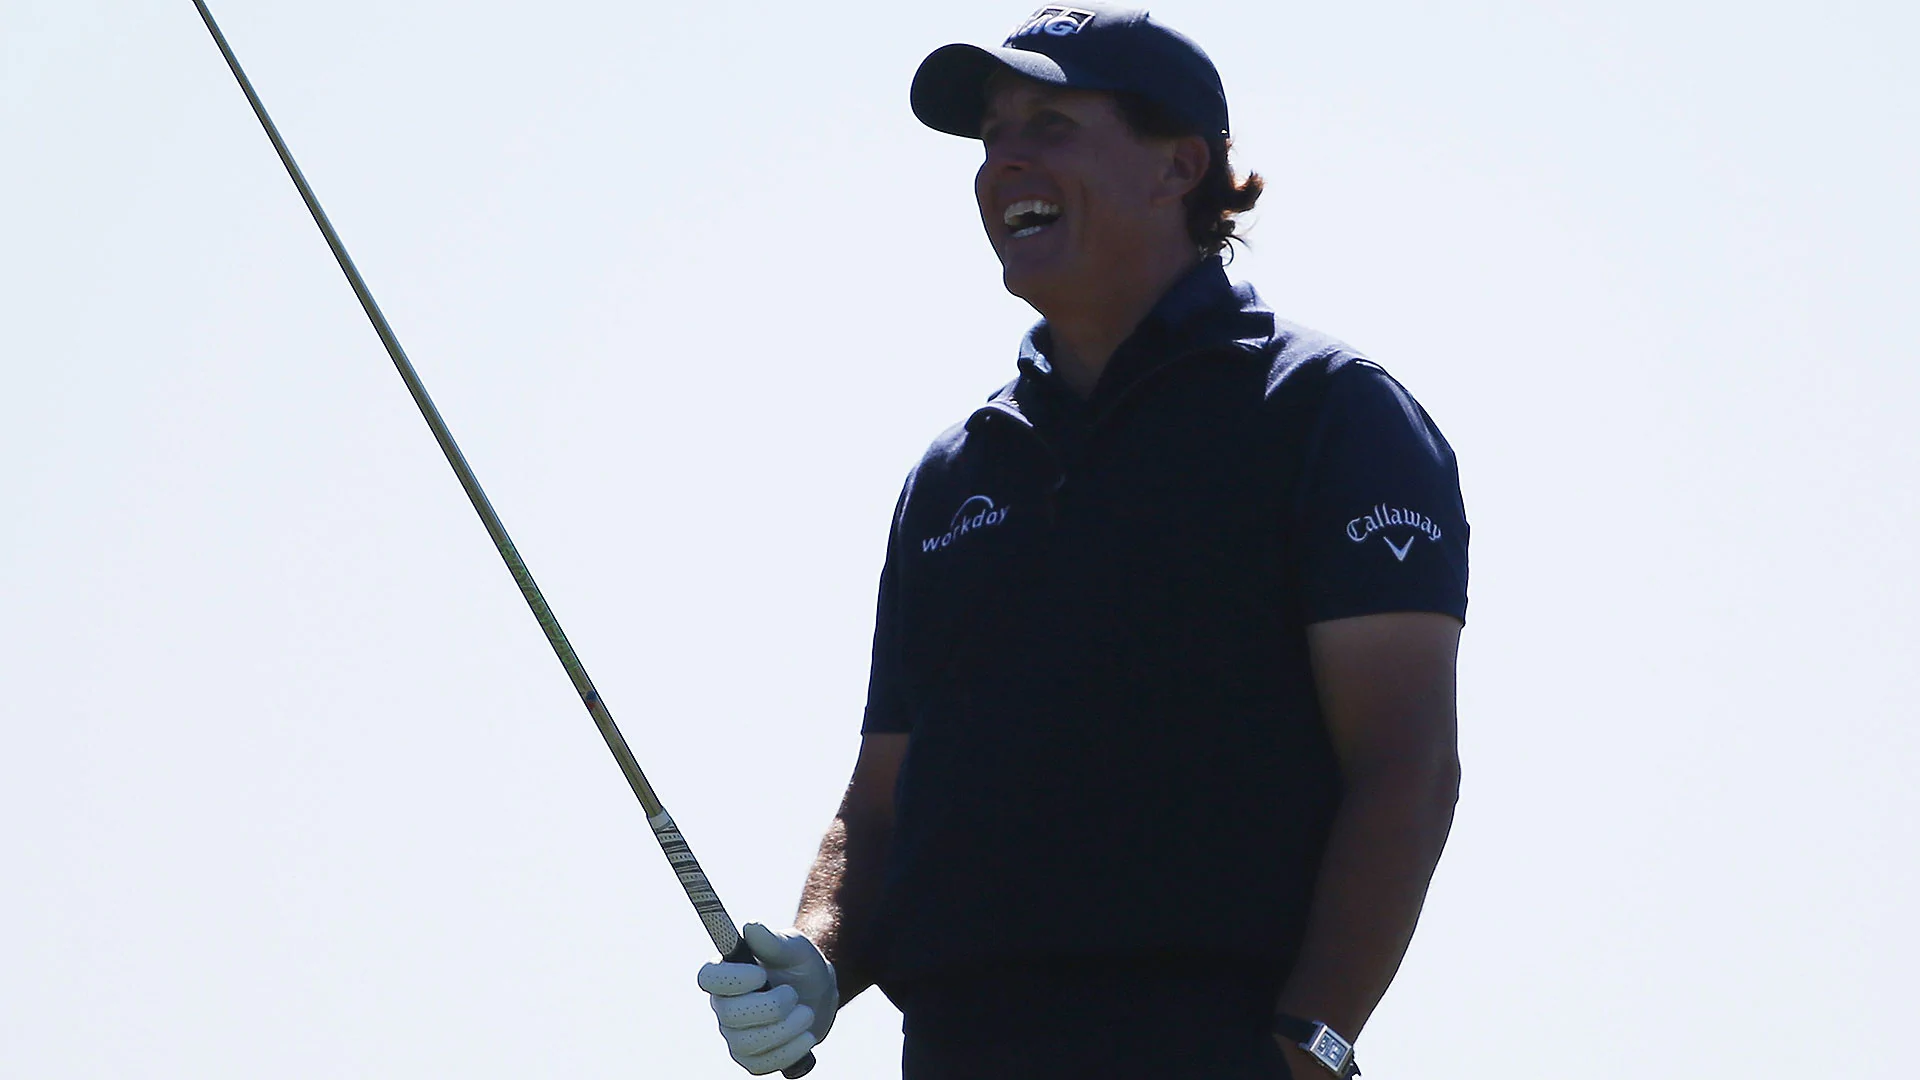 Phil hits fan with drive, signs glove, 'Next time, duck!'